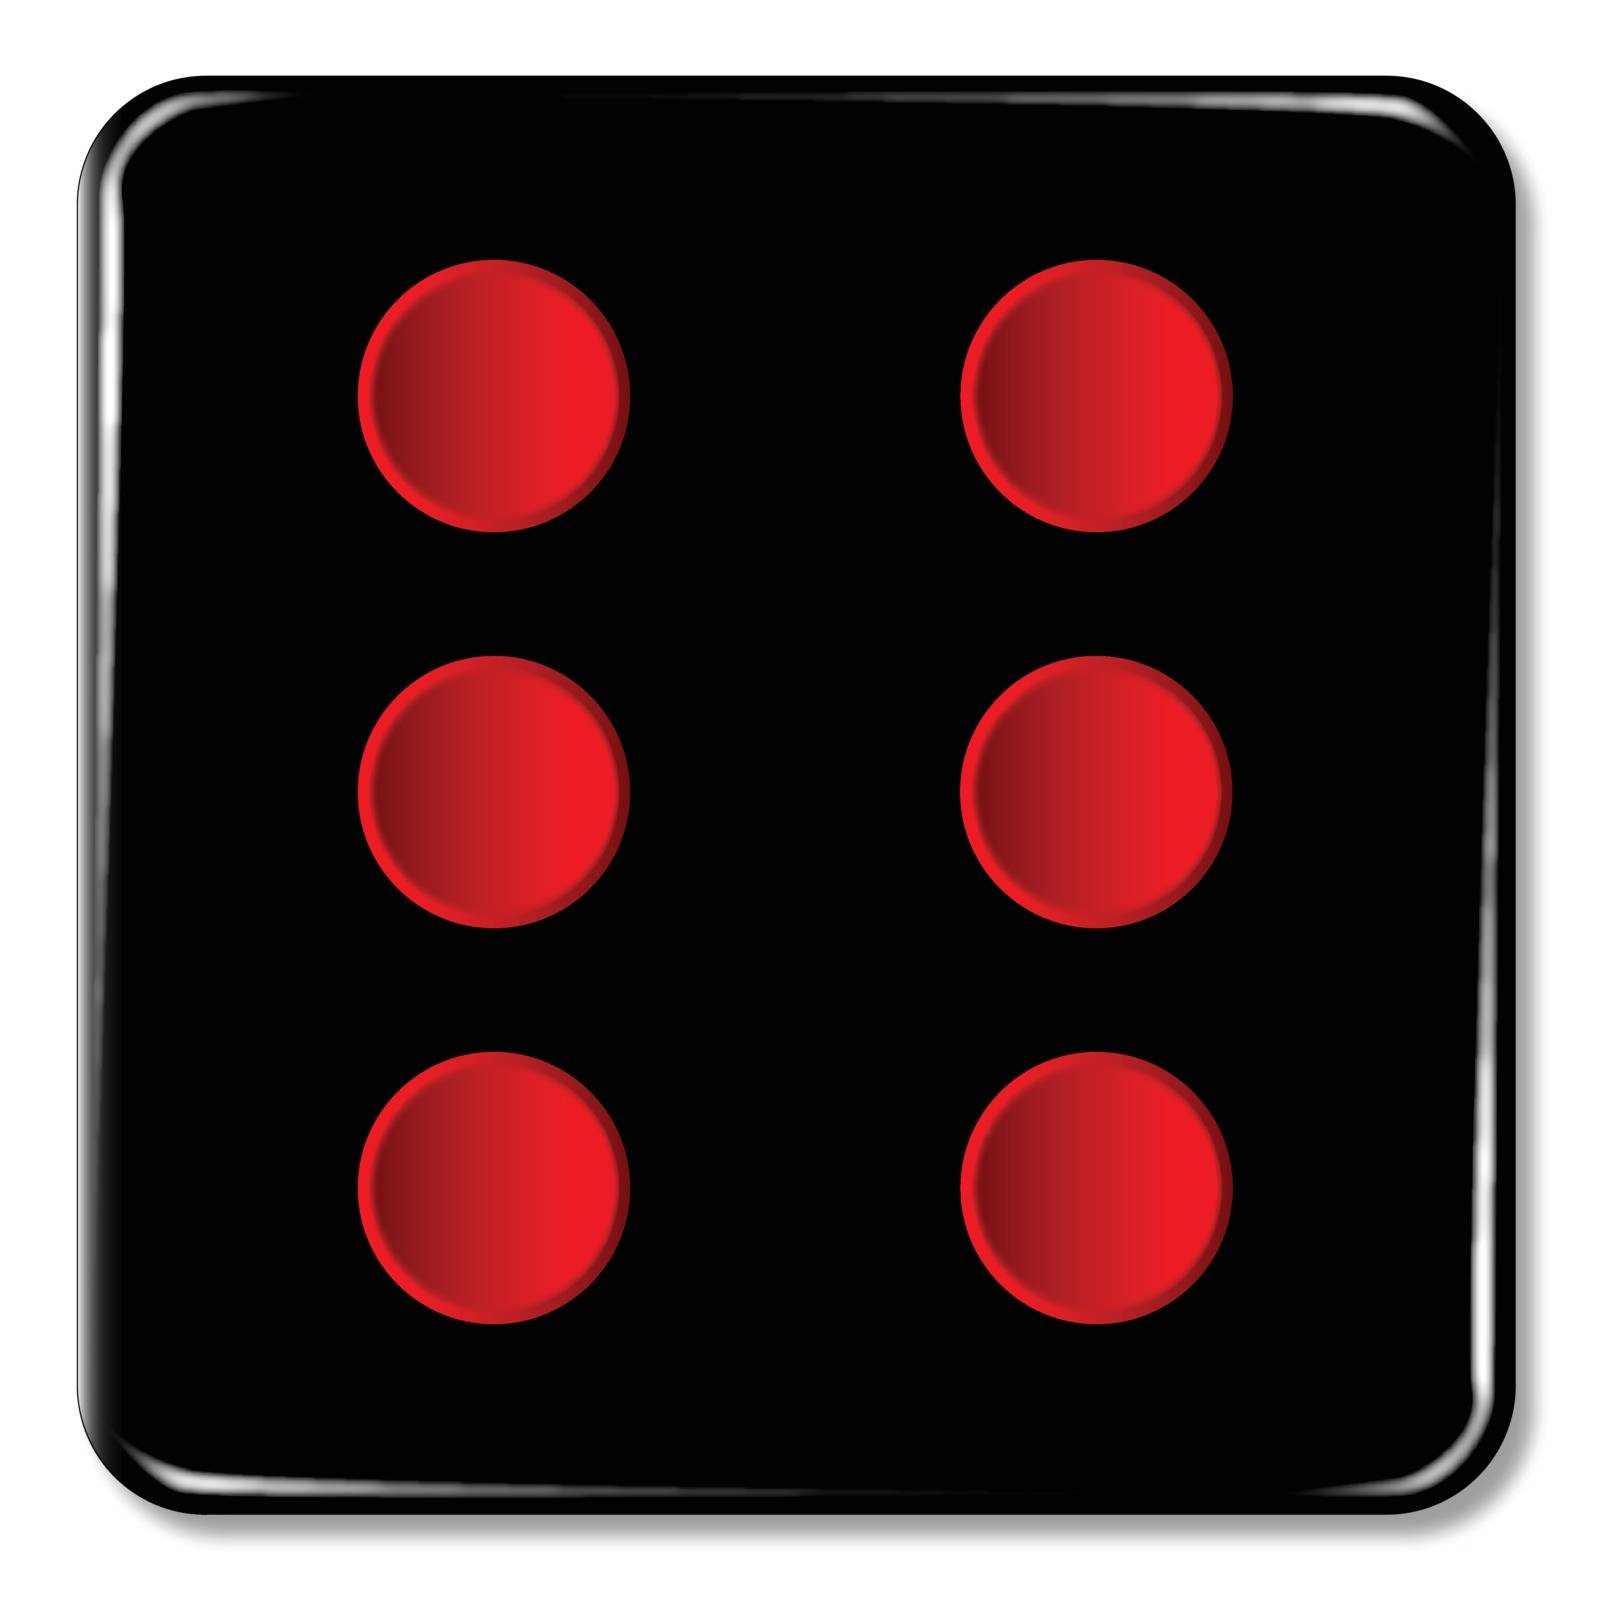 The face of a dice with six red spots over a white background